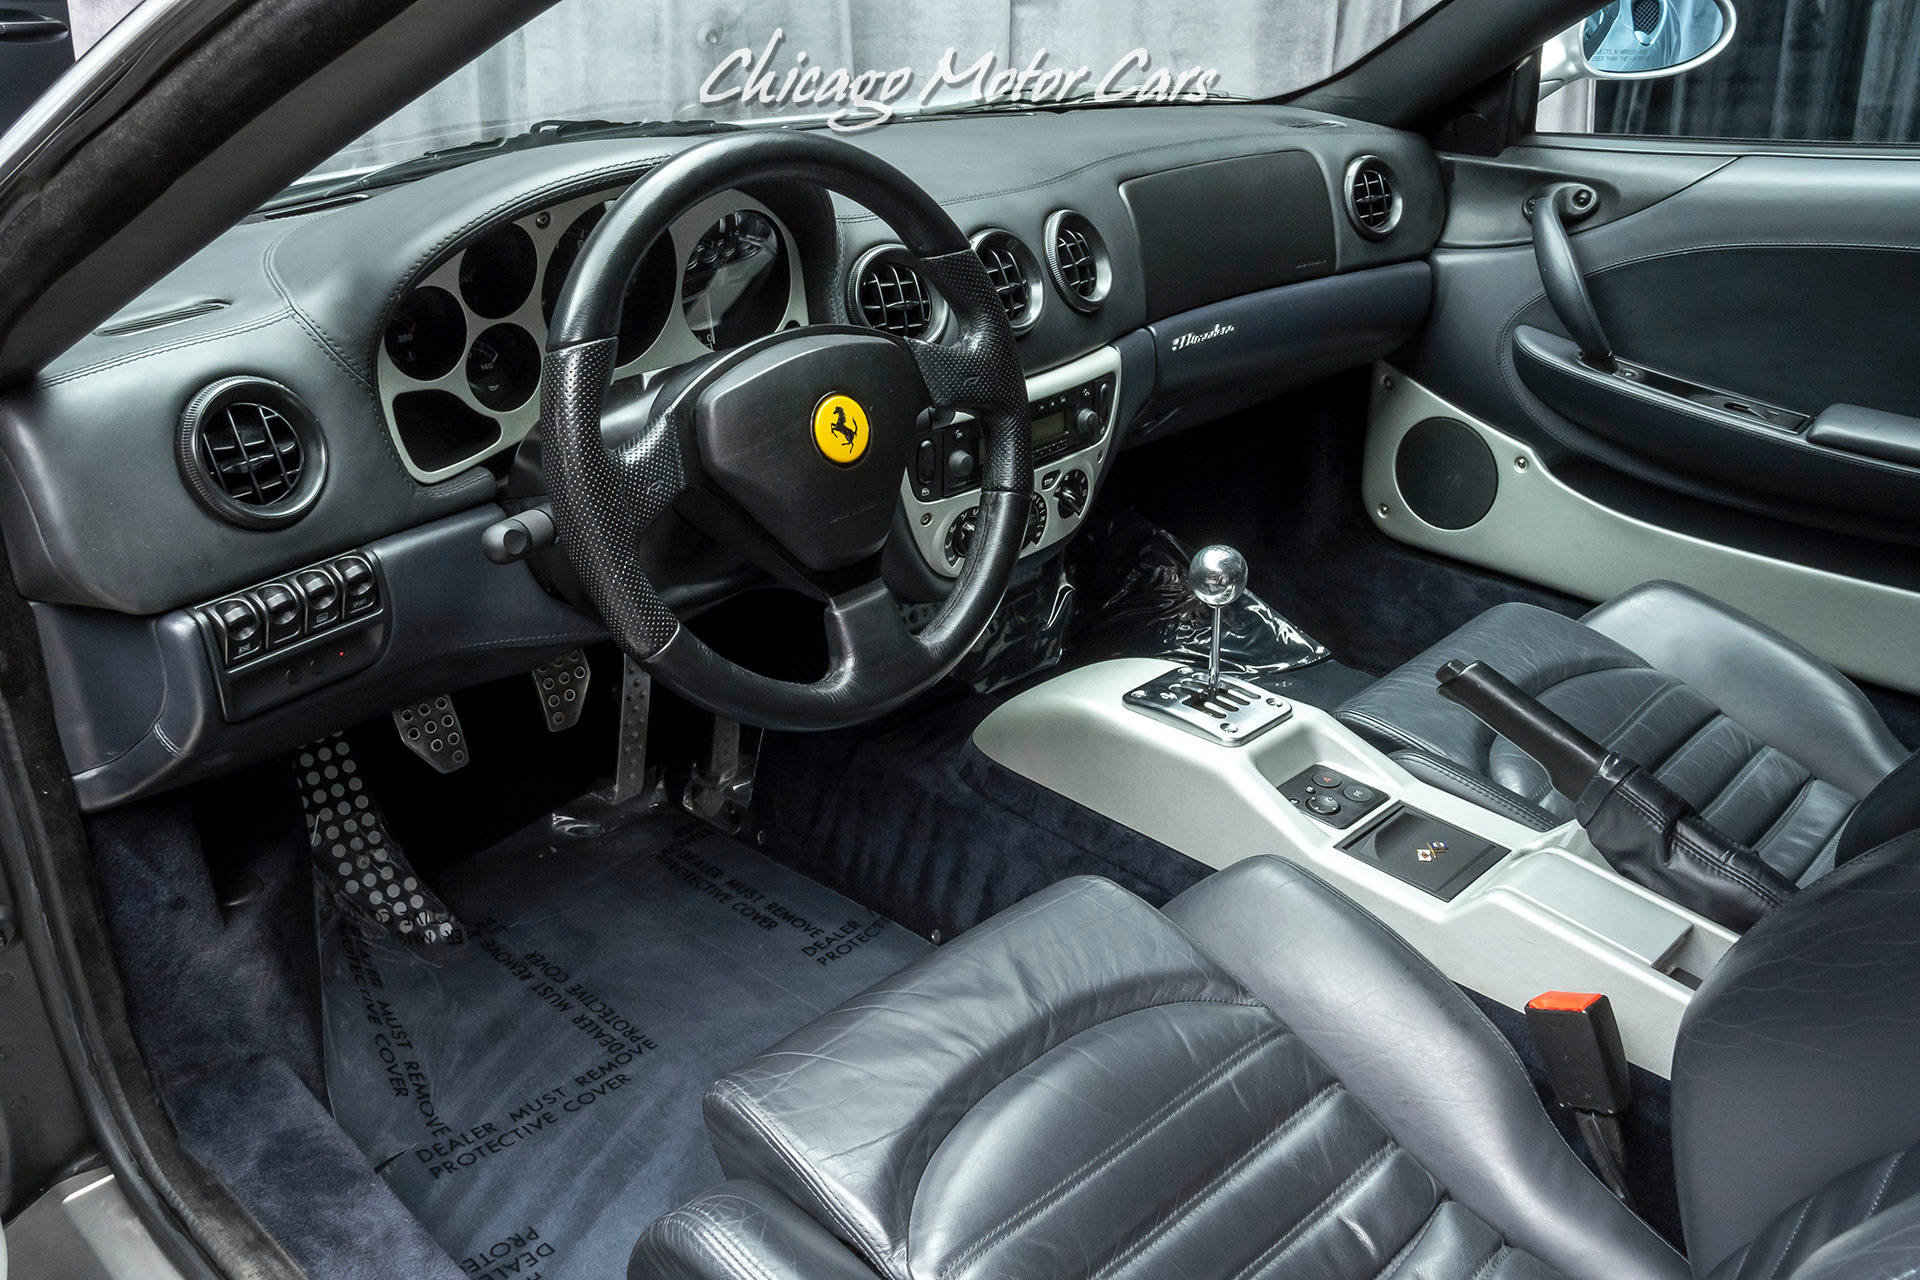 Used 2000 Ferrari 360 Modena Coupe *Gated 6-Speed* For Sale ($99,800) | Chicago Motor Cars Stock ...